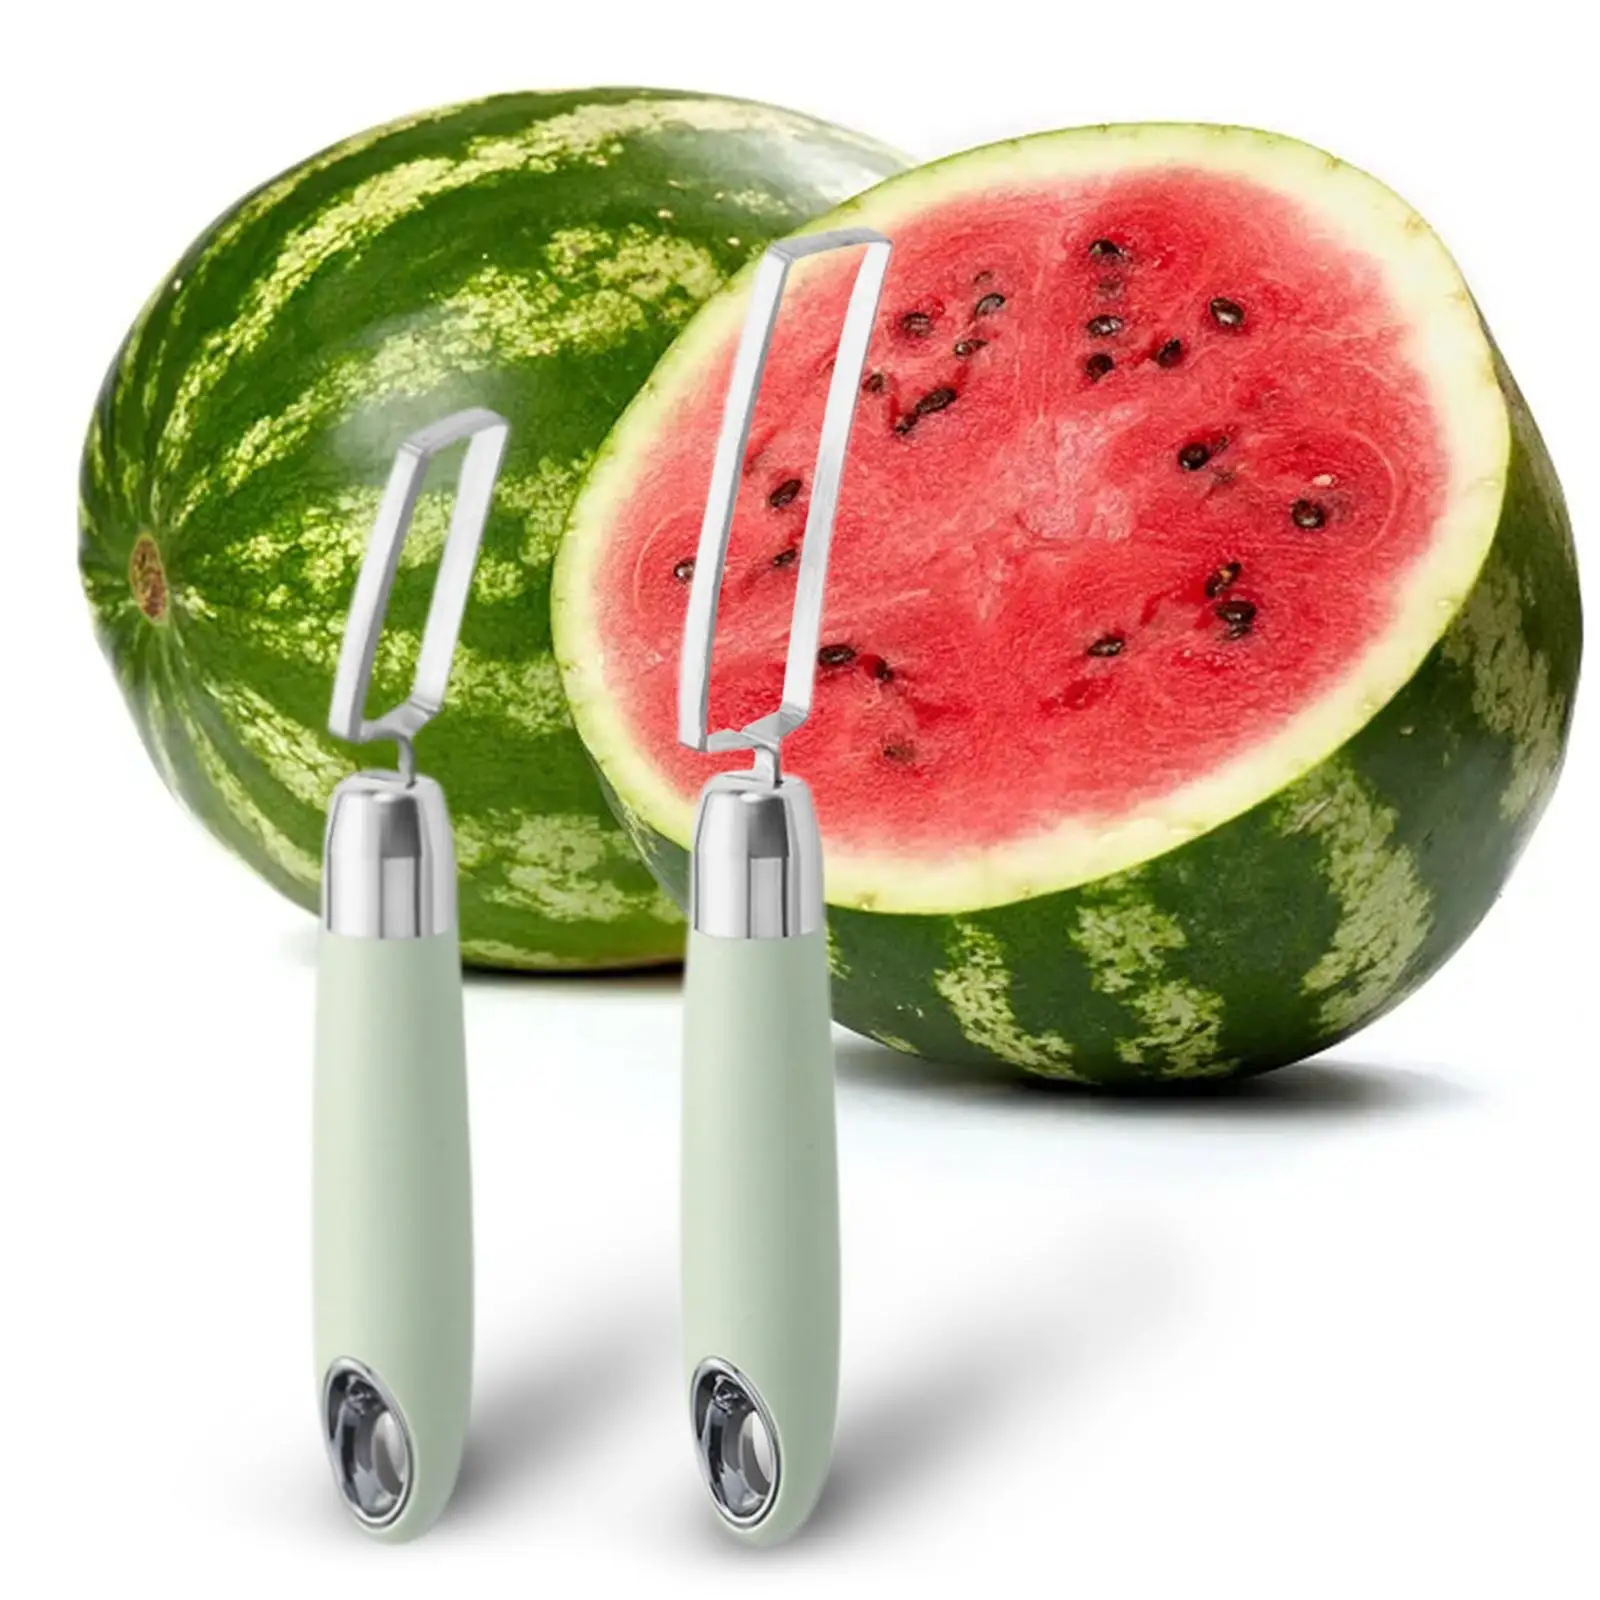 Watermelon Cutter Lightweight Fruit Vegetable Cutter Stainless Steel Watermelon Cube Cutter for Party Summer Camping Holiday